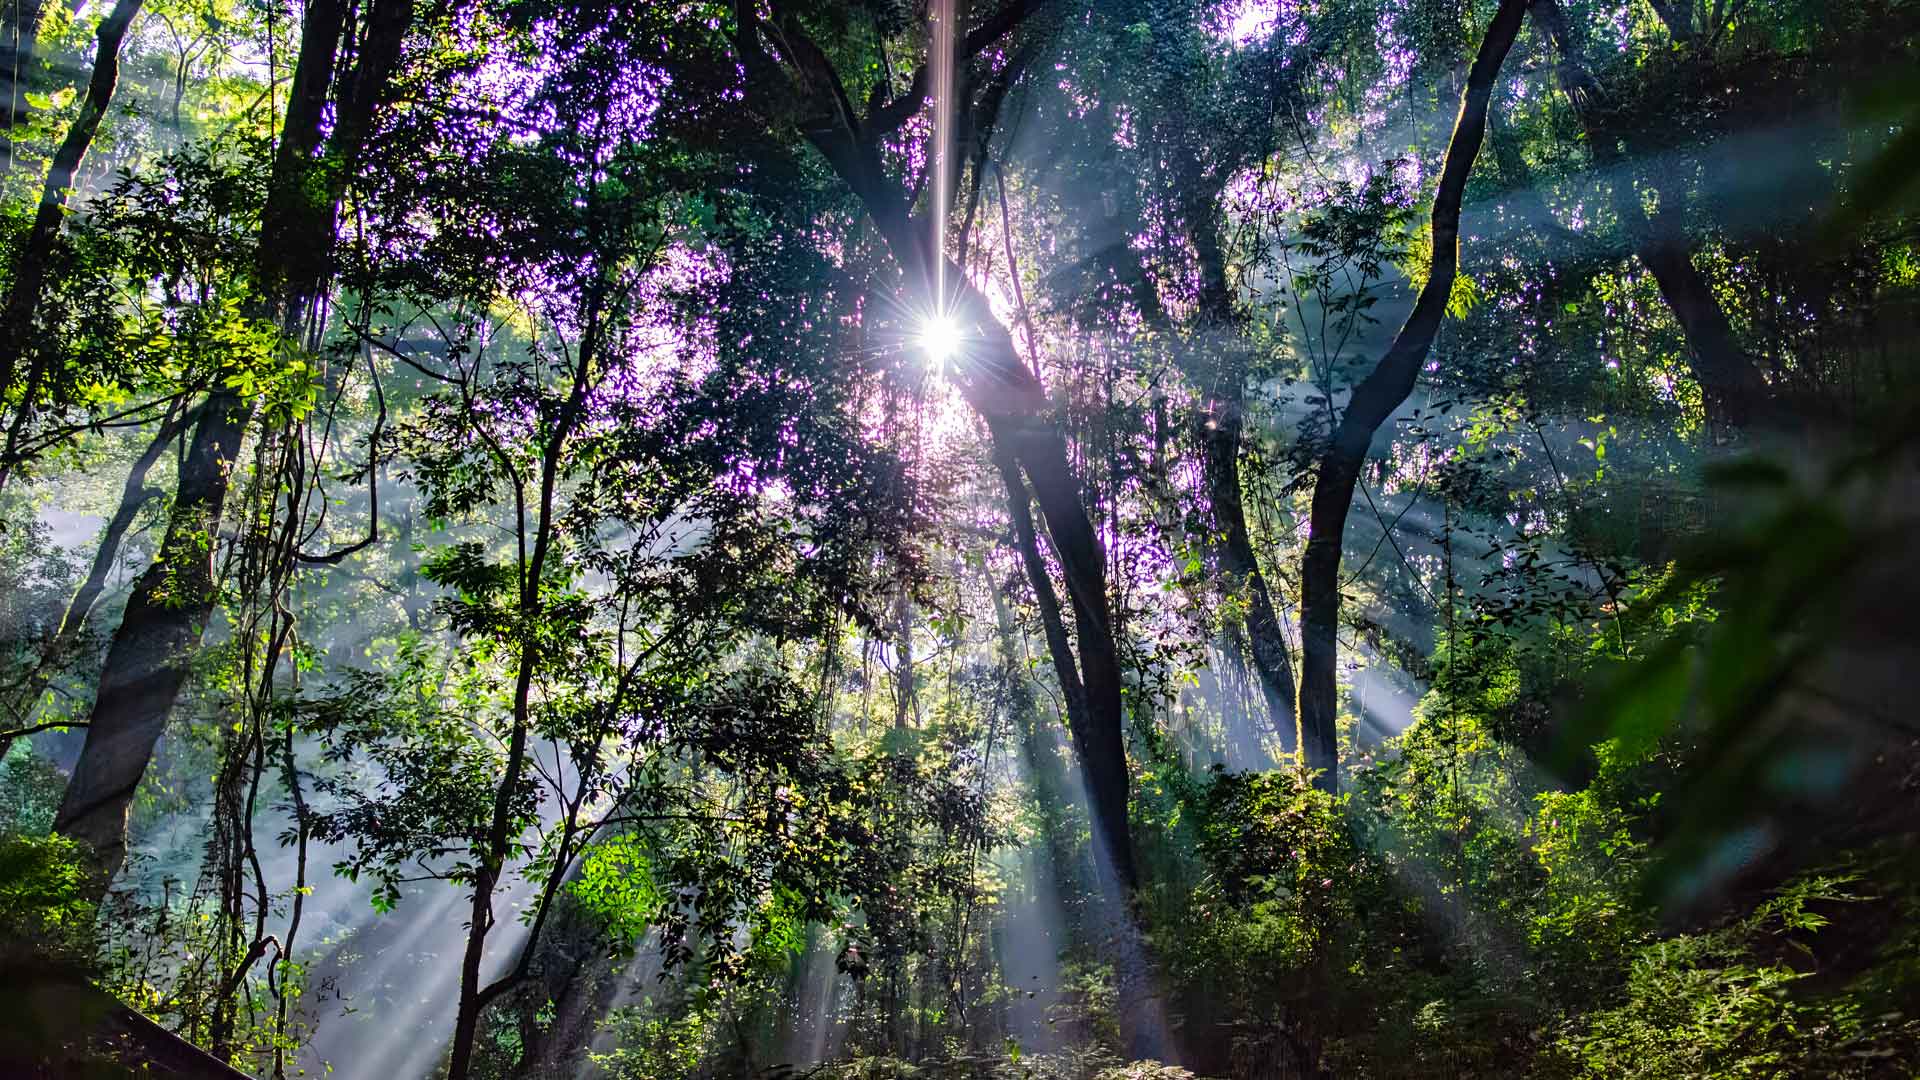 Sun rays filtering through the dense canopy, illuminating the serene forest during our forest bath experience in El Pilar Reserve.